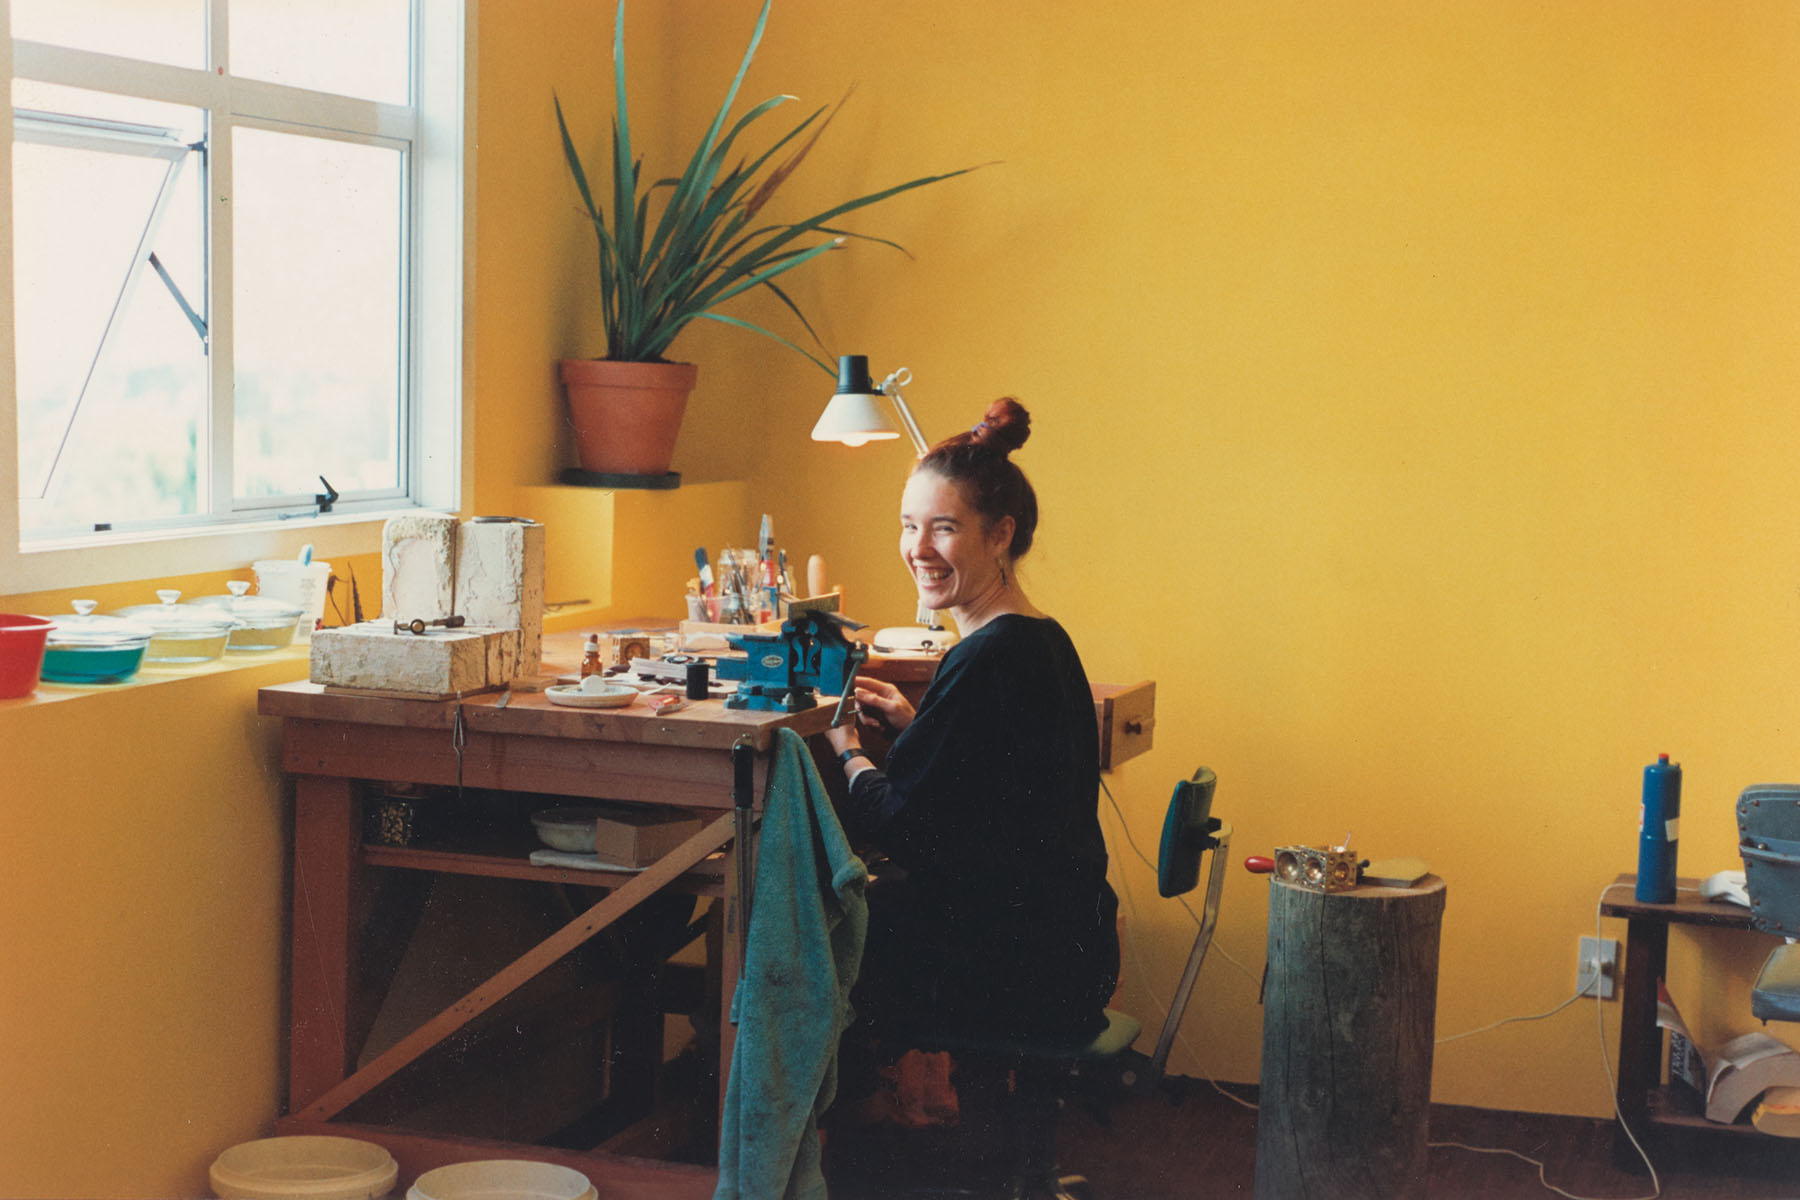 Lisa sits at desk in room with bright yellow walls crafting jewellery